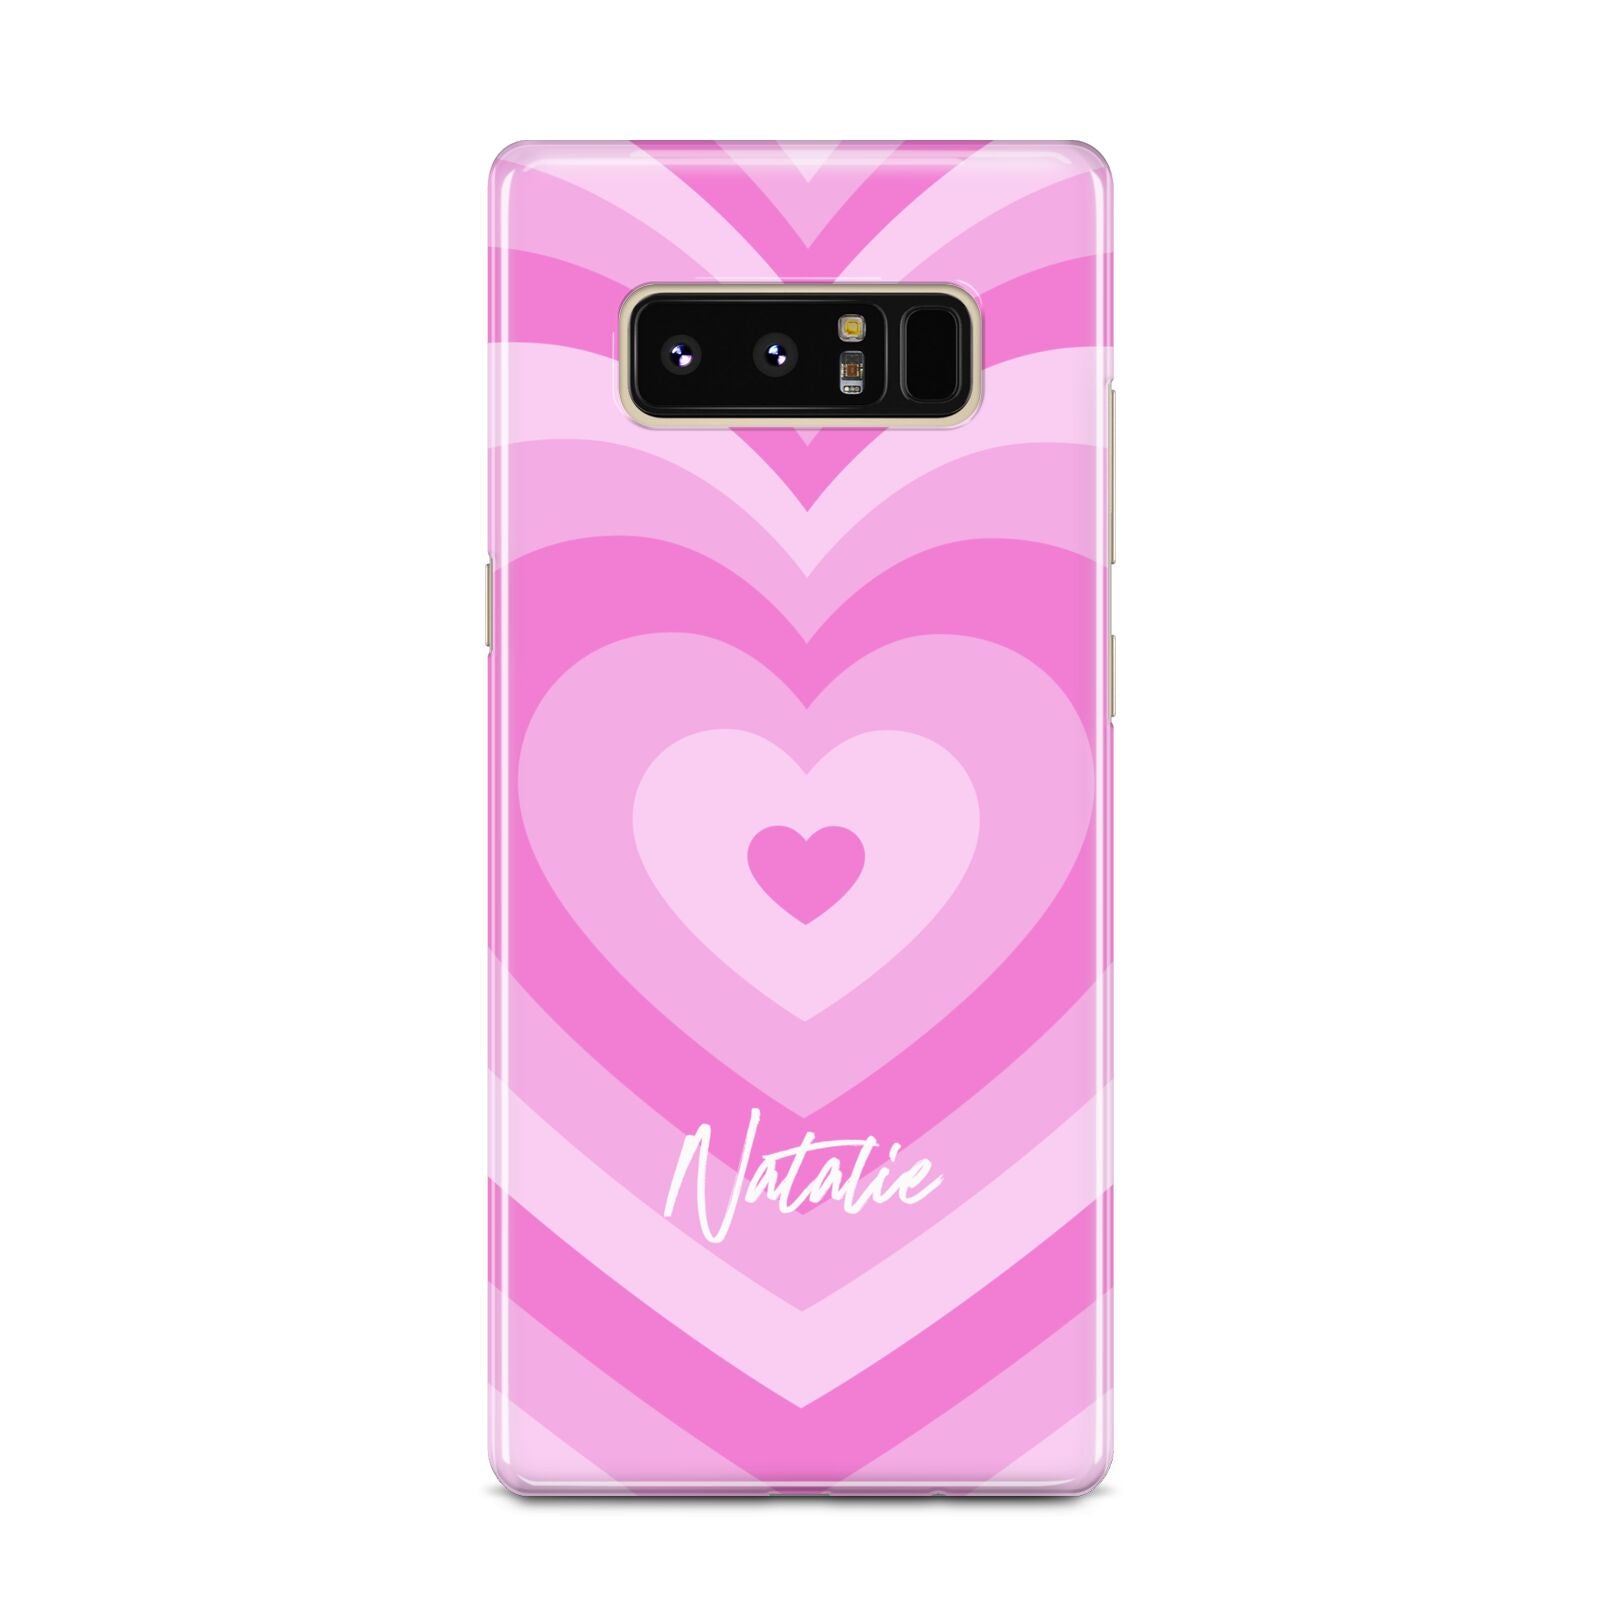 Personalised Pink Heart Samsung Galaxy Note 8 Case